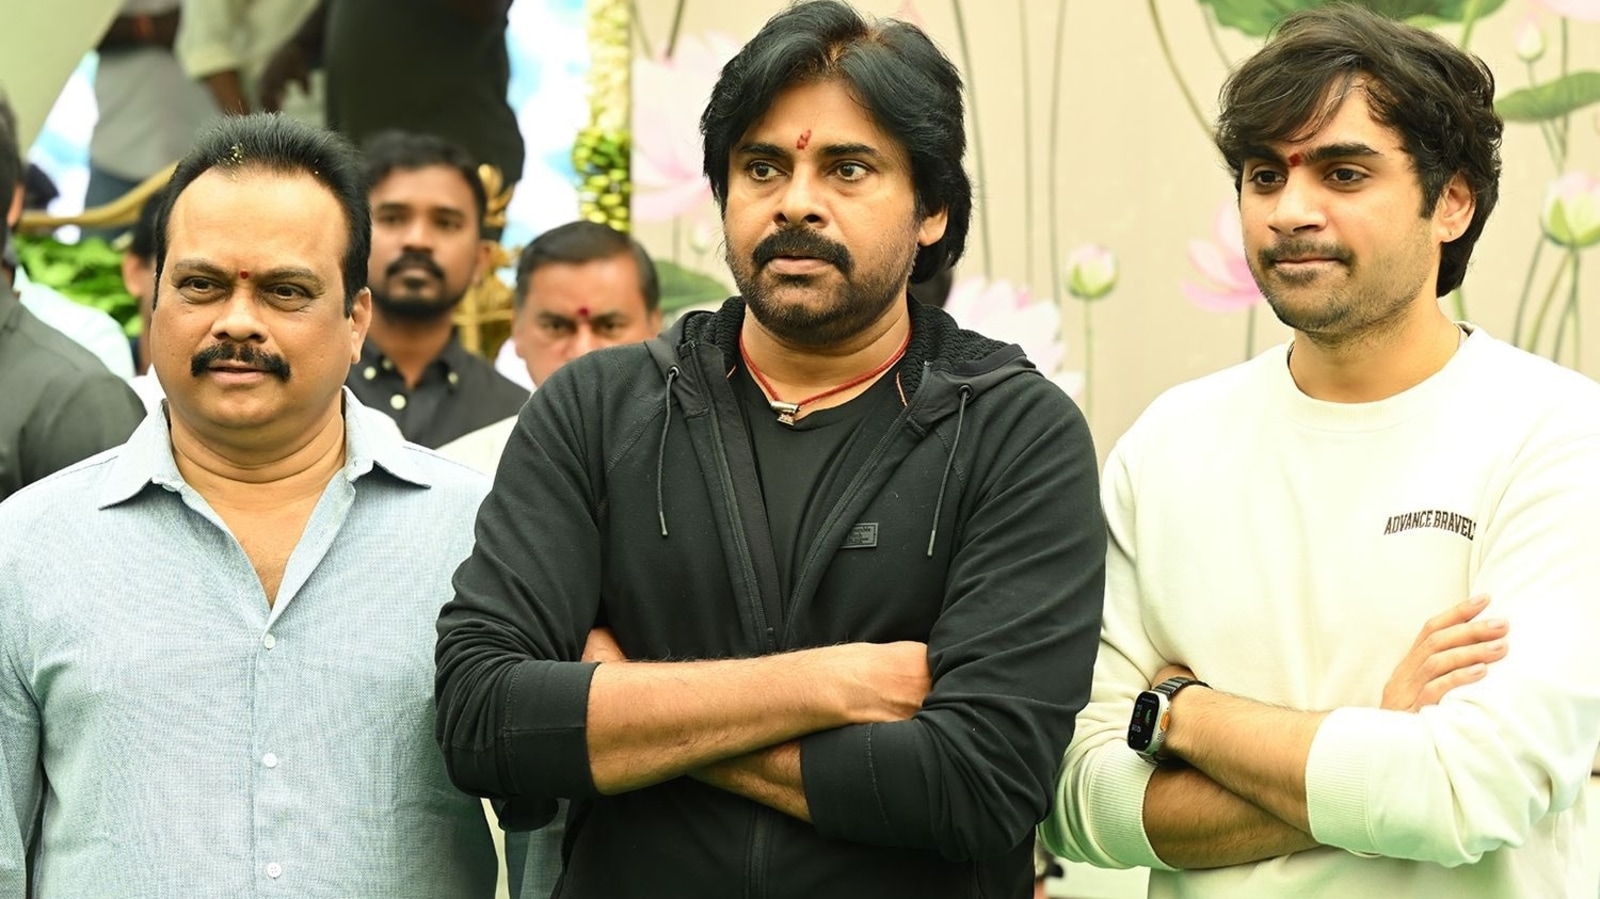 Incredible Compilation of Pawan Kalyan’s Latest Images in Full 4K: Over 999+ Spectacular Captures